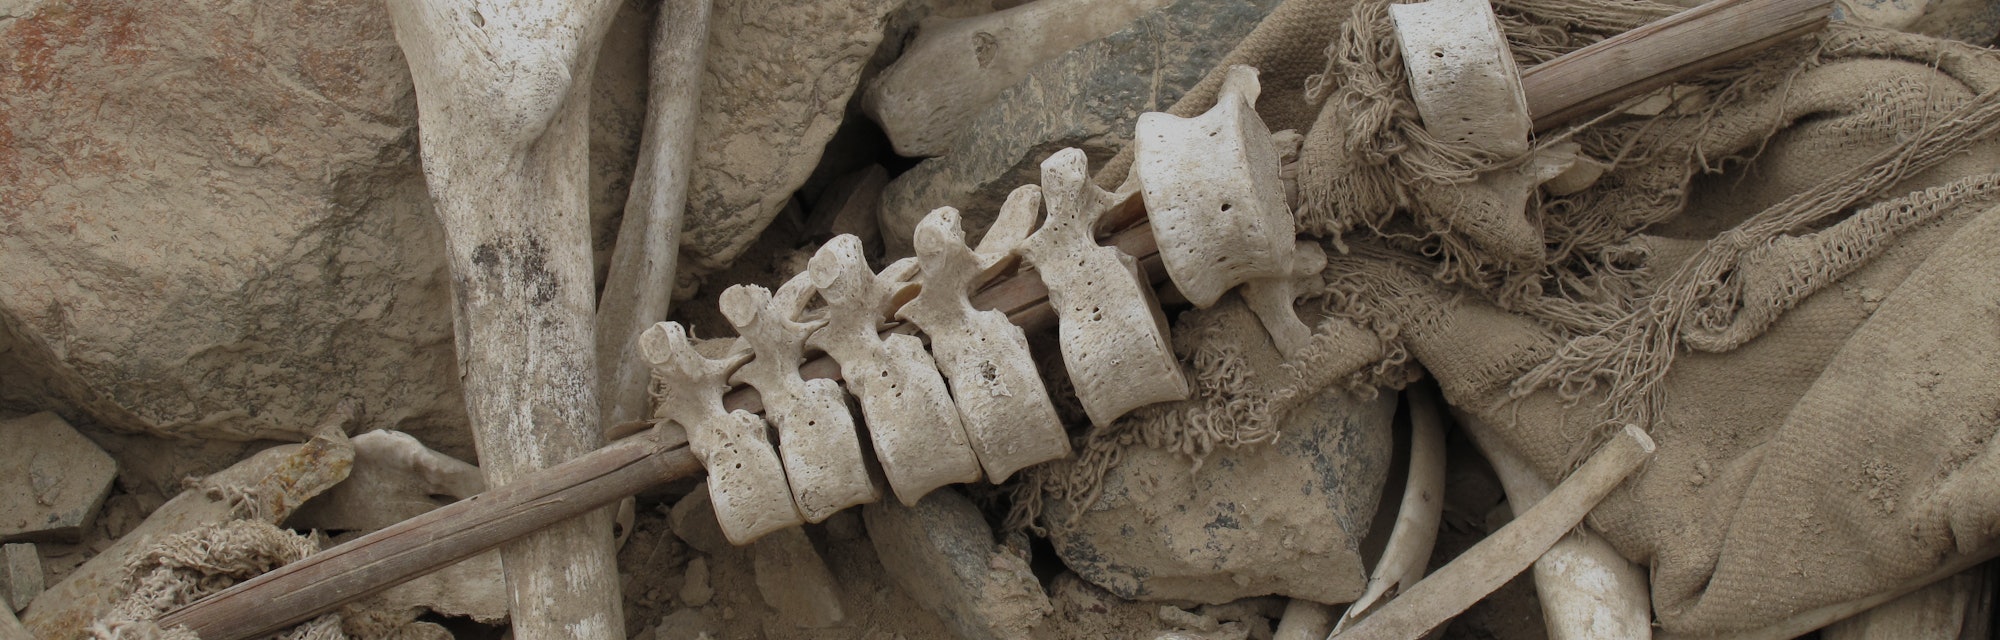 Human vertebrae stacked on a post.